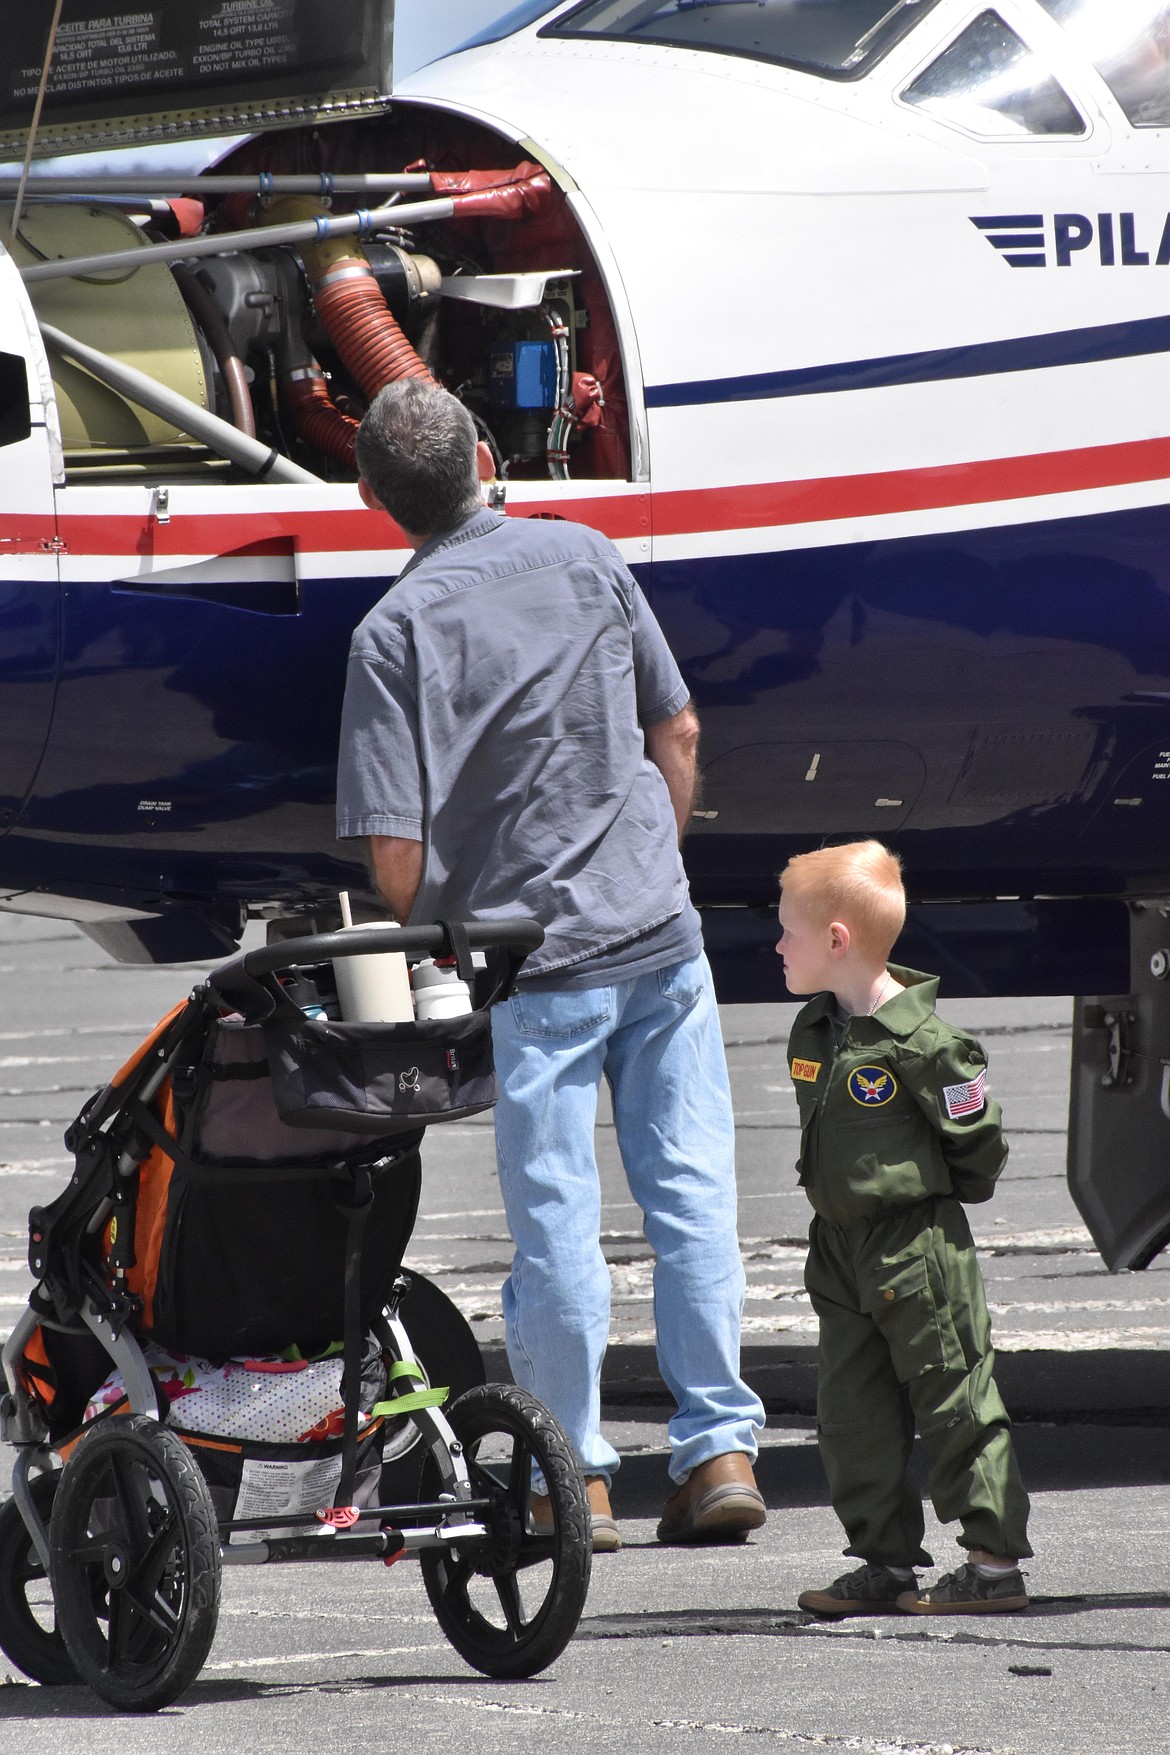 A family looks over the inner workings of an airplane at the Moses Lake Airshow. Organizers have said airshows inspire young people to consider becoming pilots and help adults enjoy their fascination with flight.